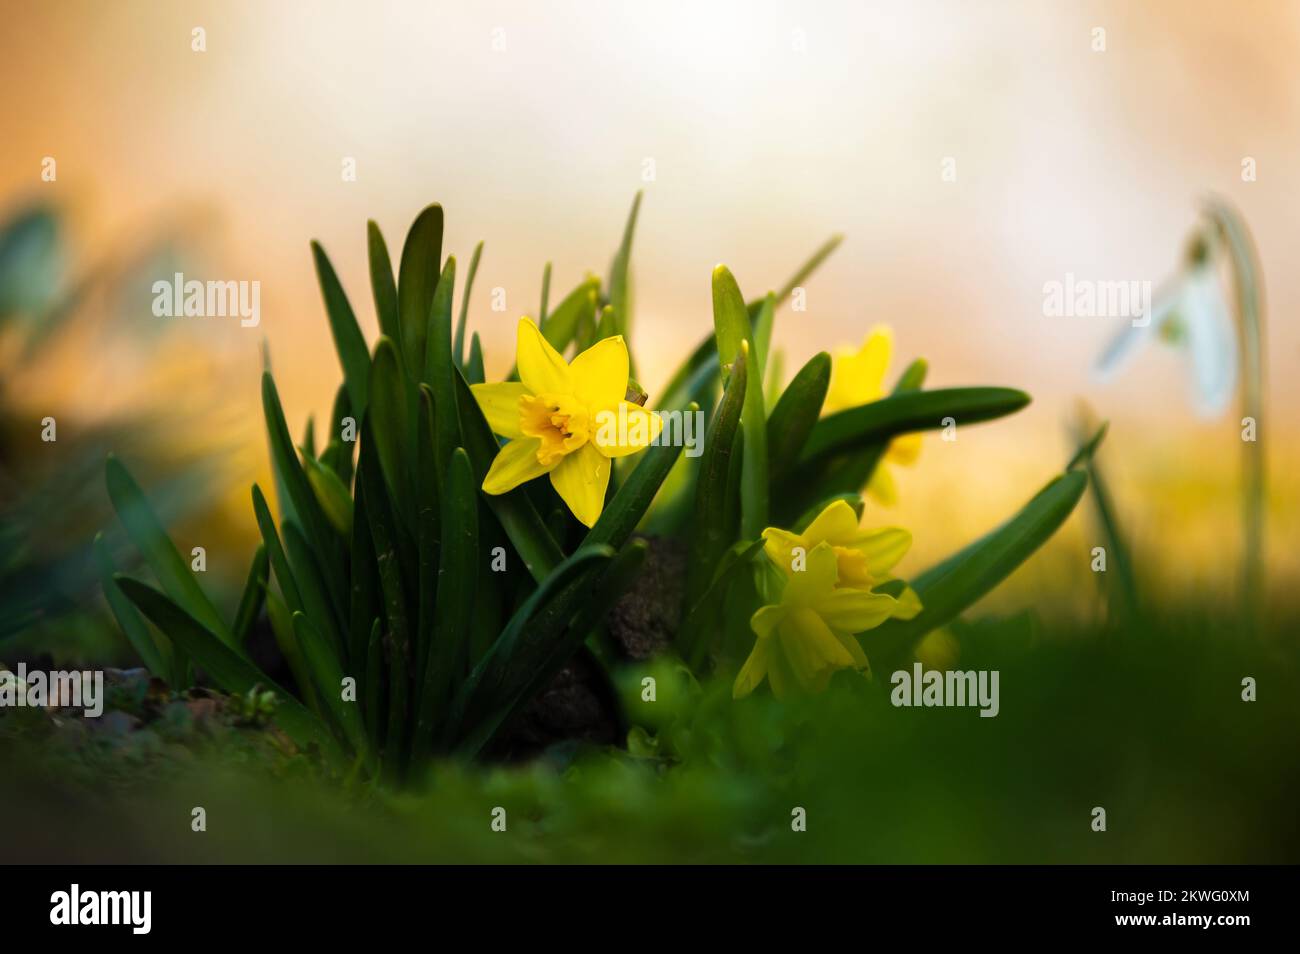 Daffodil next to a snowdrop on a flower bed in springtime Stock Photo